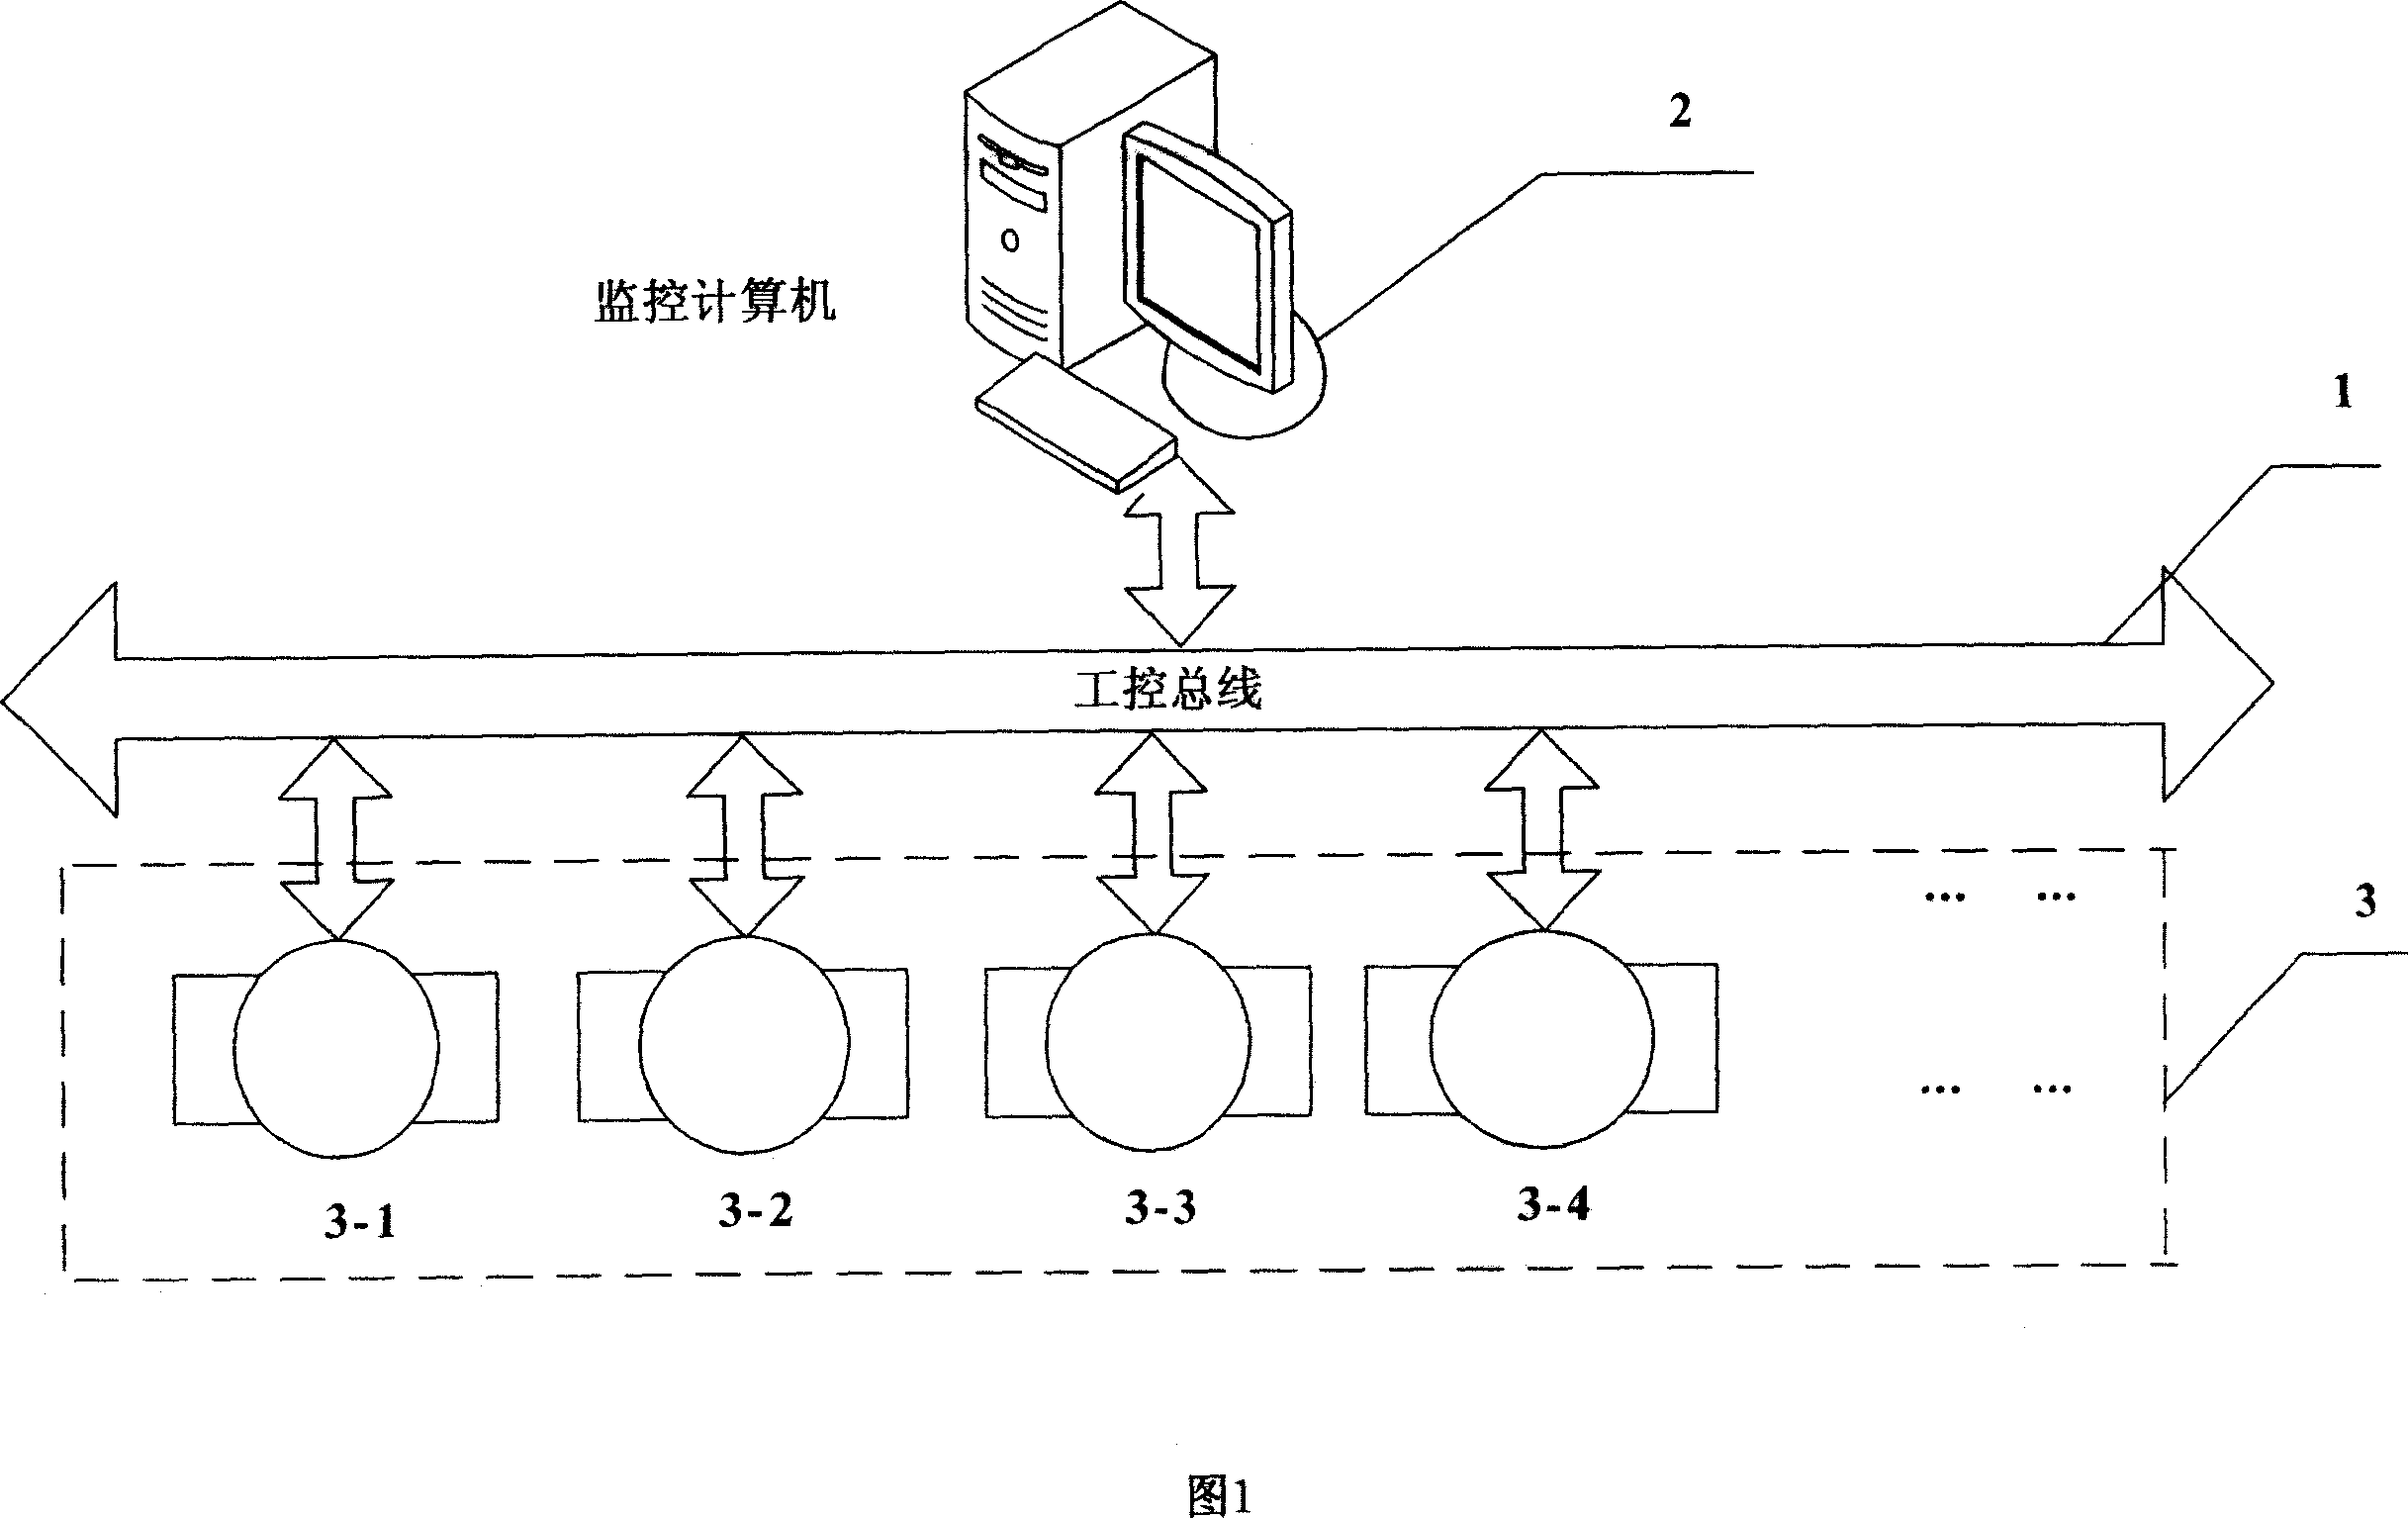 Distributed network plug-and-play measurement and control system